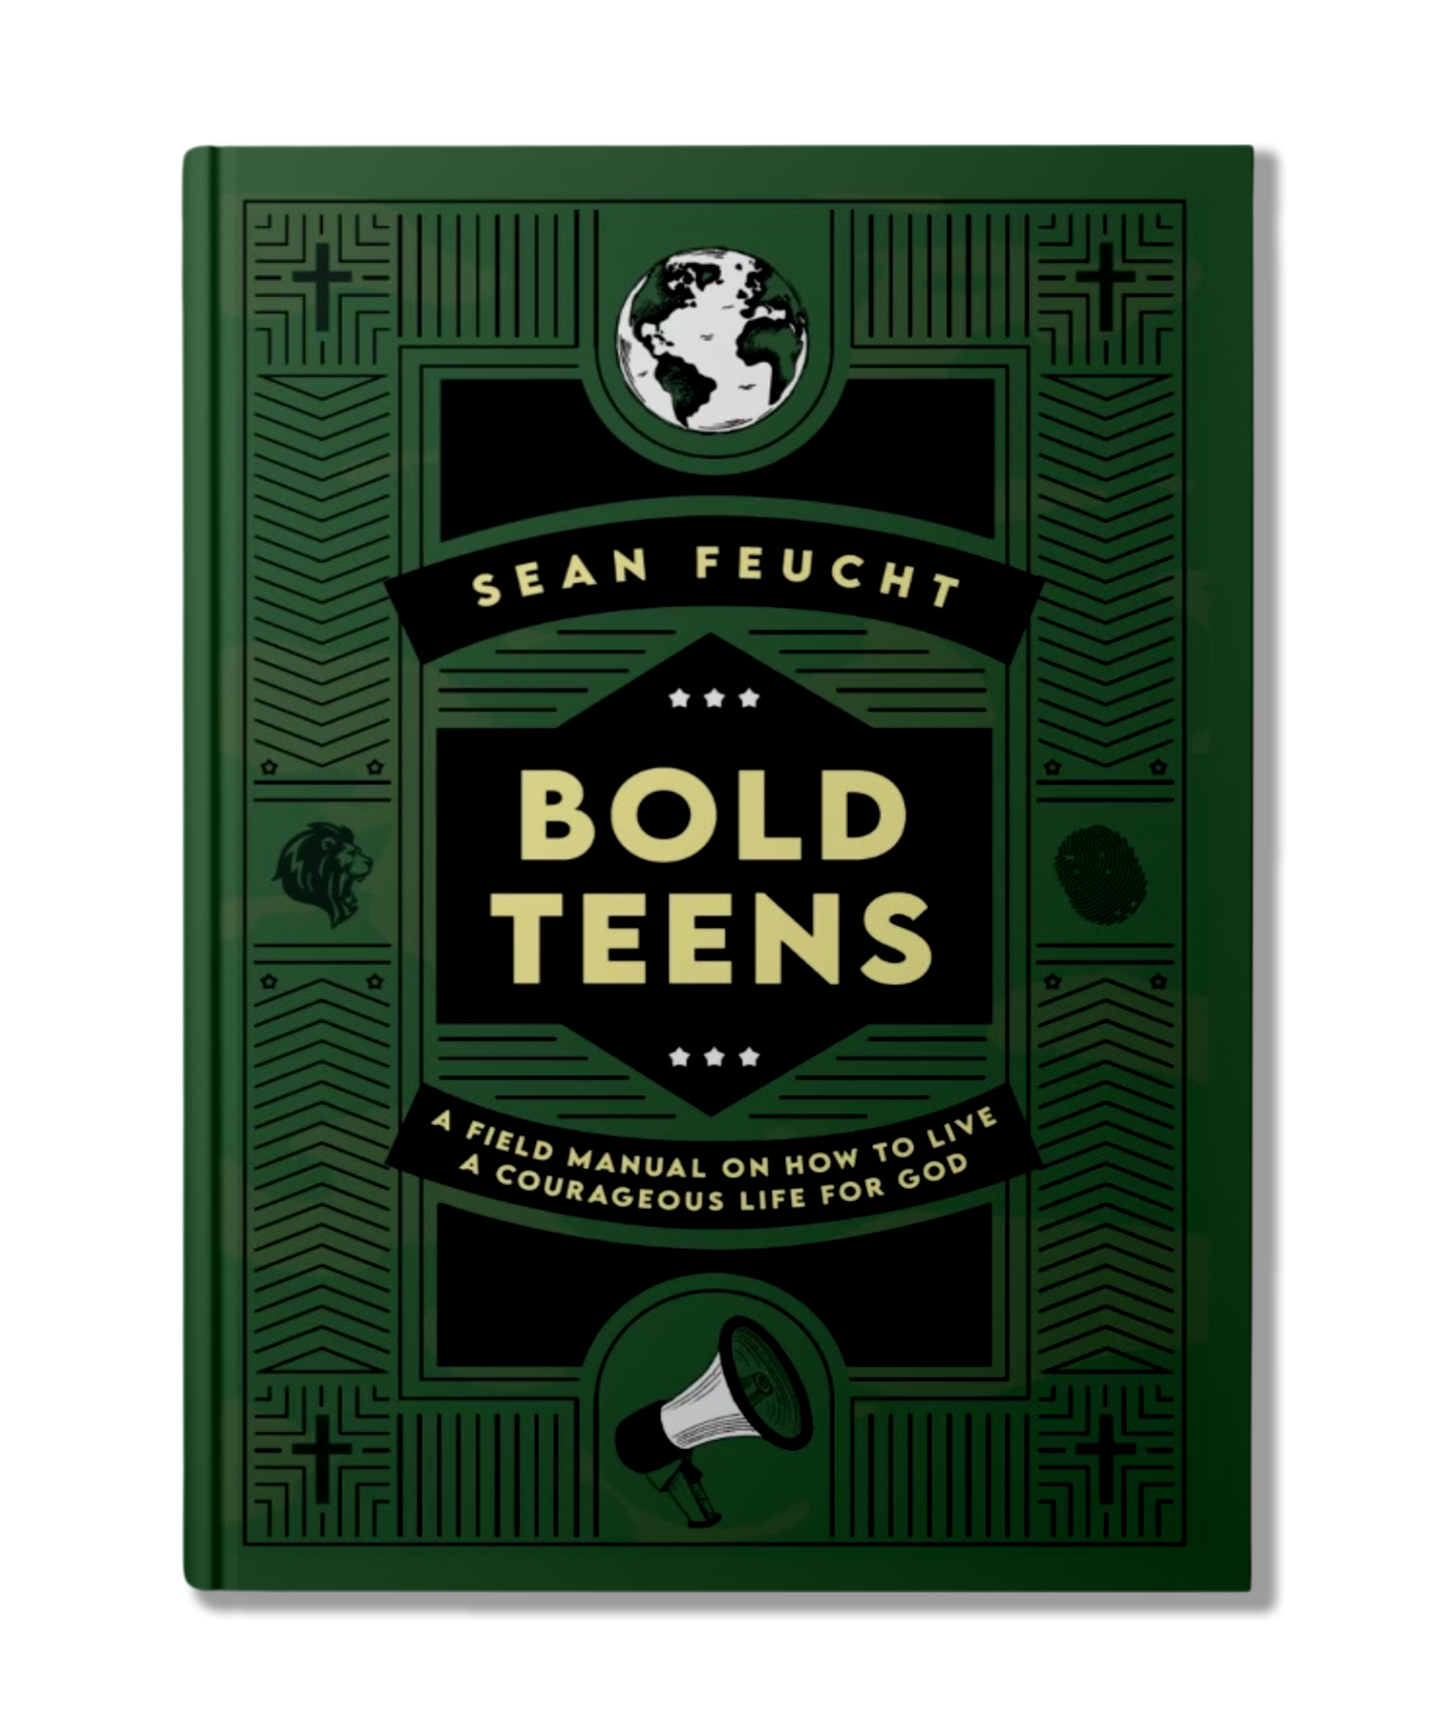 Bold Teens: A Field Manual to Live a Courageous Life for God